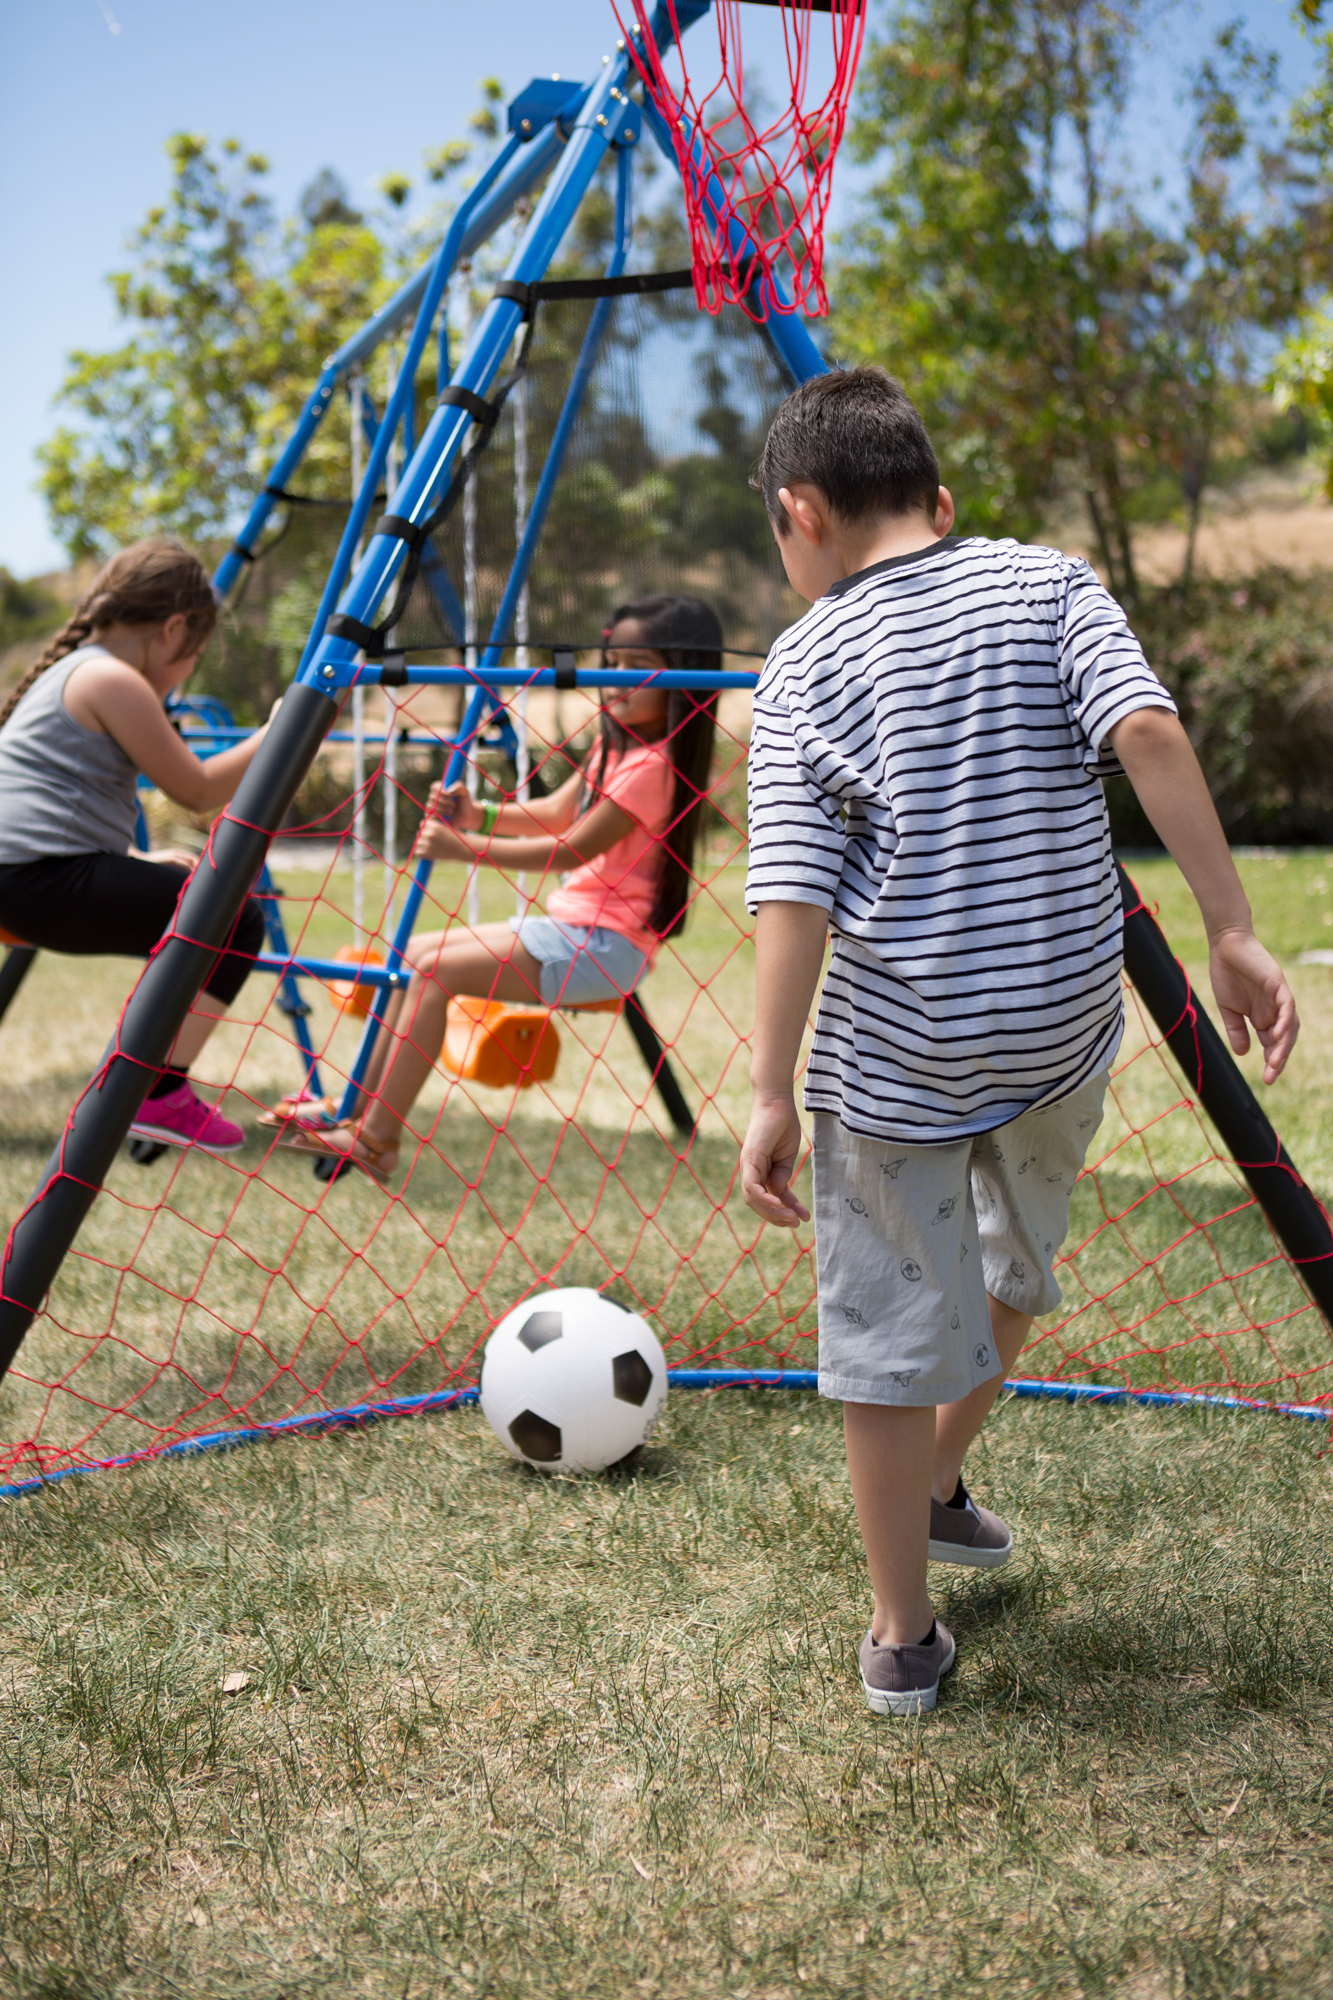 FITNESS REALITY KIDS 7 Station Sports Series Metal Swing Set with Basketball and Soccer - image 4 of 16